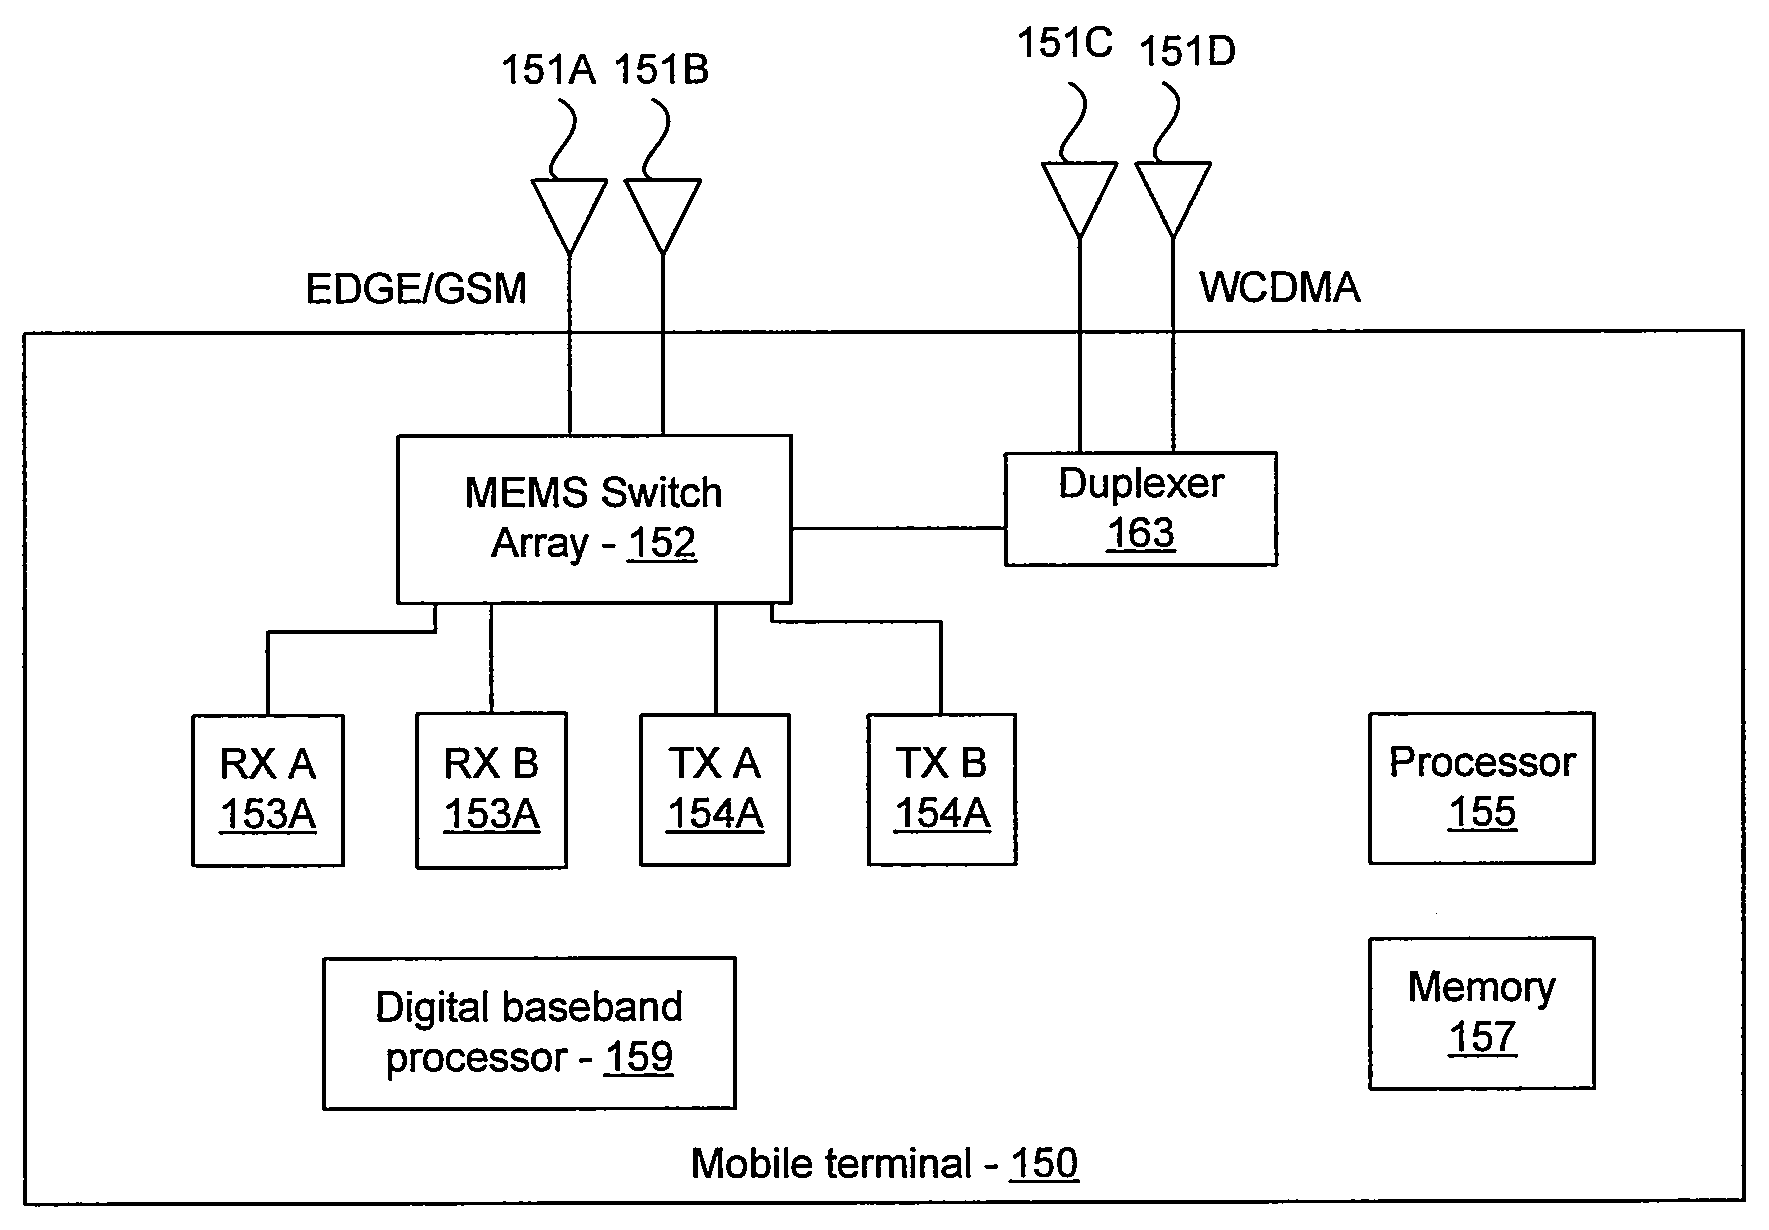 Method and system for increased resolution switching using MEMS and switched capacitors